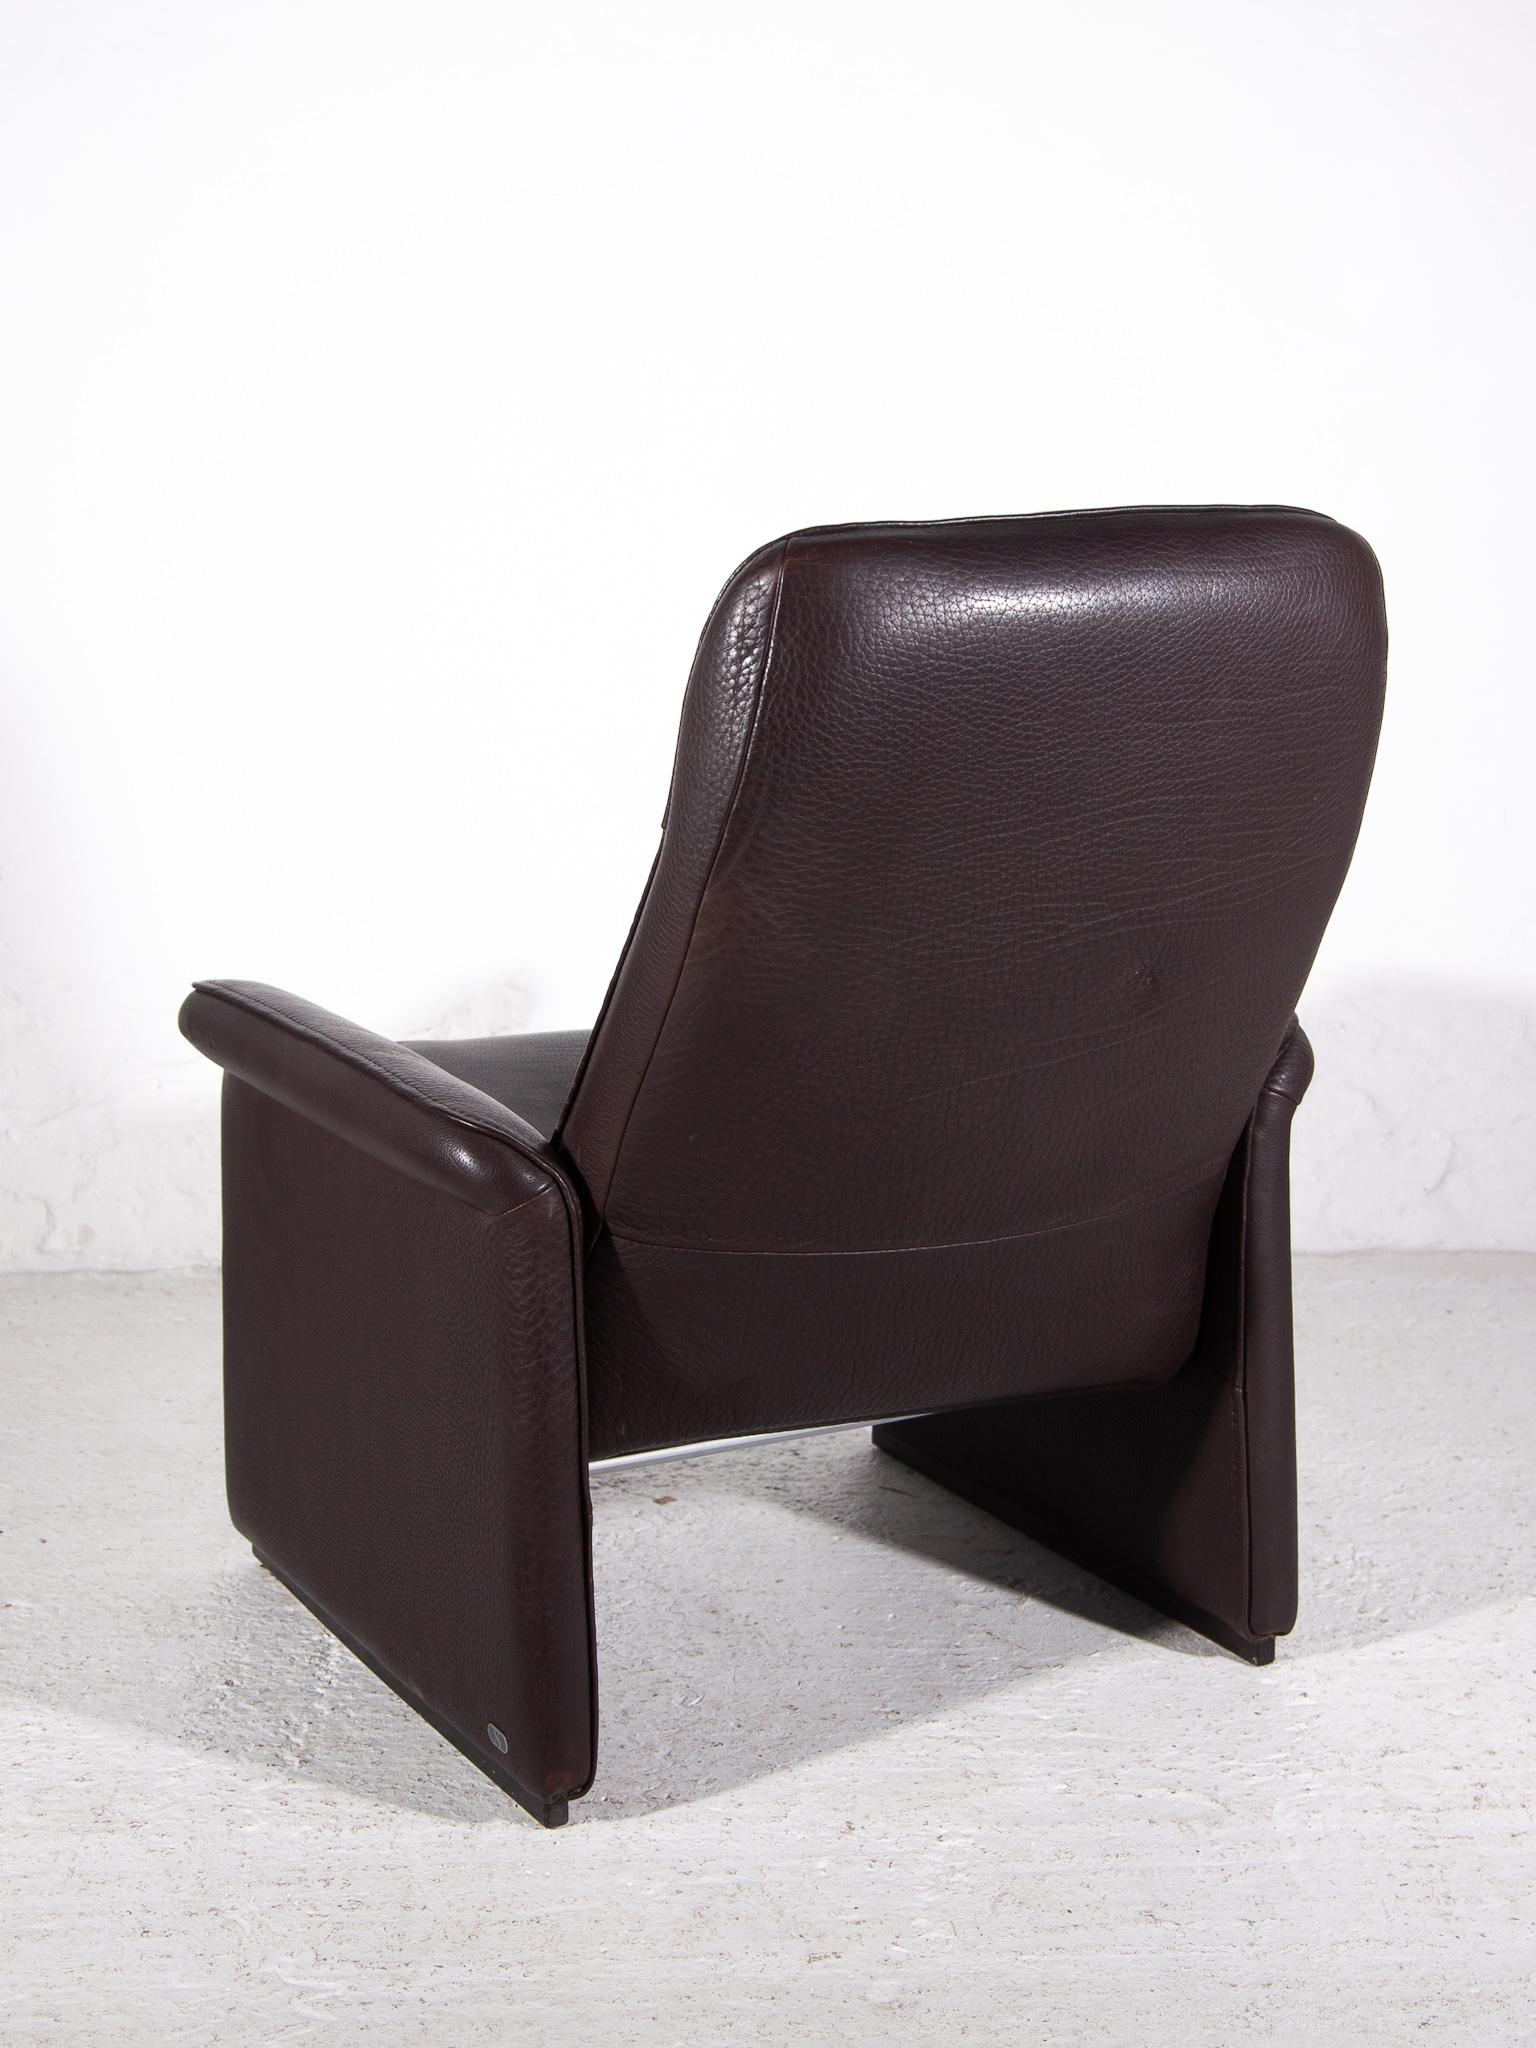 De Sede Lounge Recliner Chair DS-50 Fauteuil, 1970s In Good Condition For Sale In Antwerp, BE